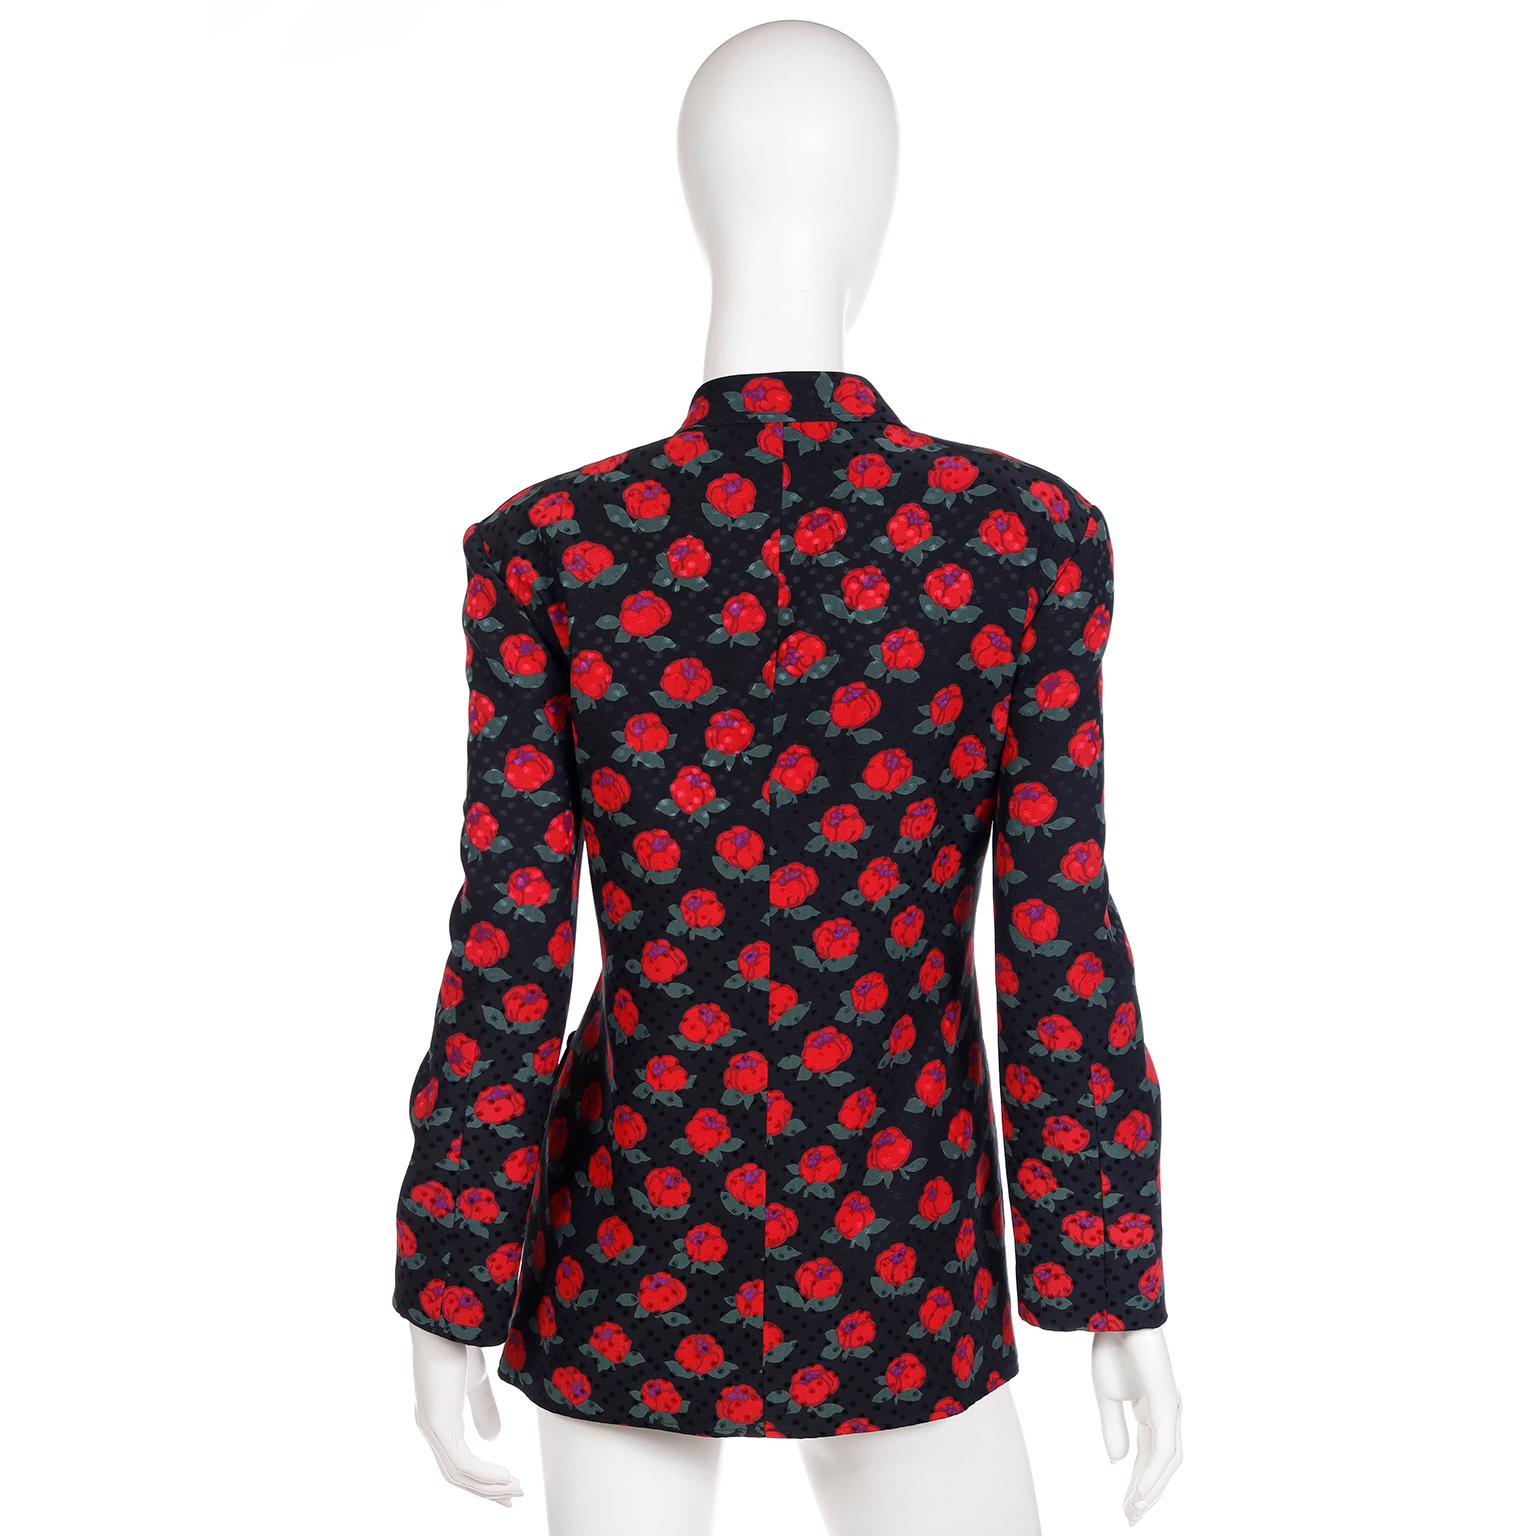 Vintage Louis Feraud  Silk Black and Red Rose Print Jacket and Camisole Top  For Sale 1